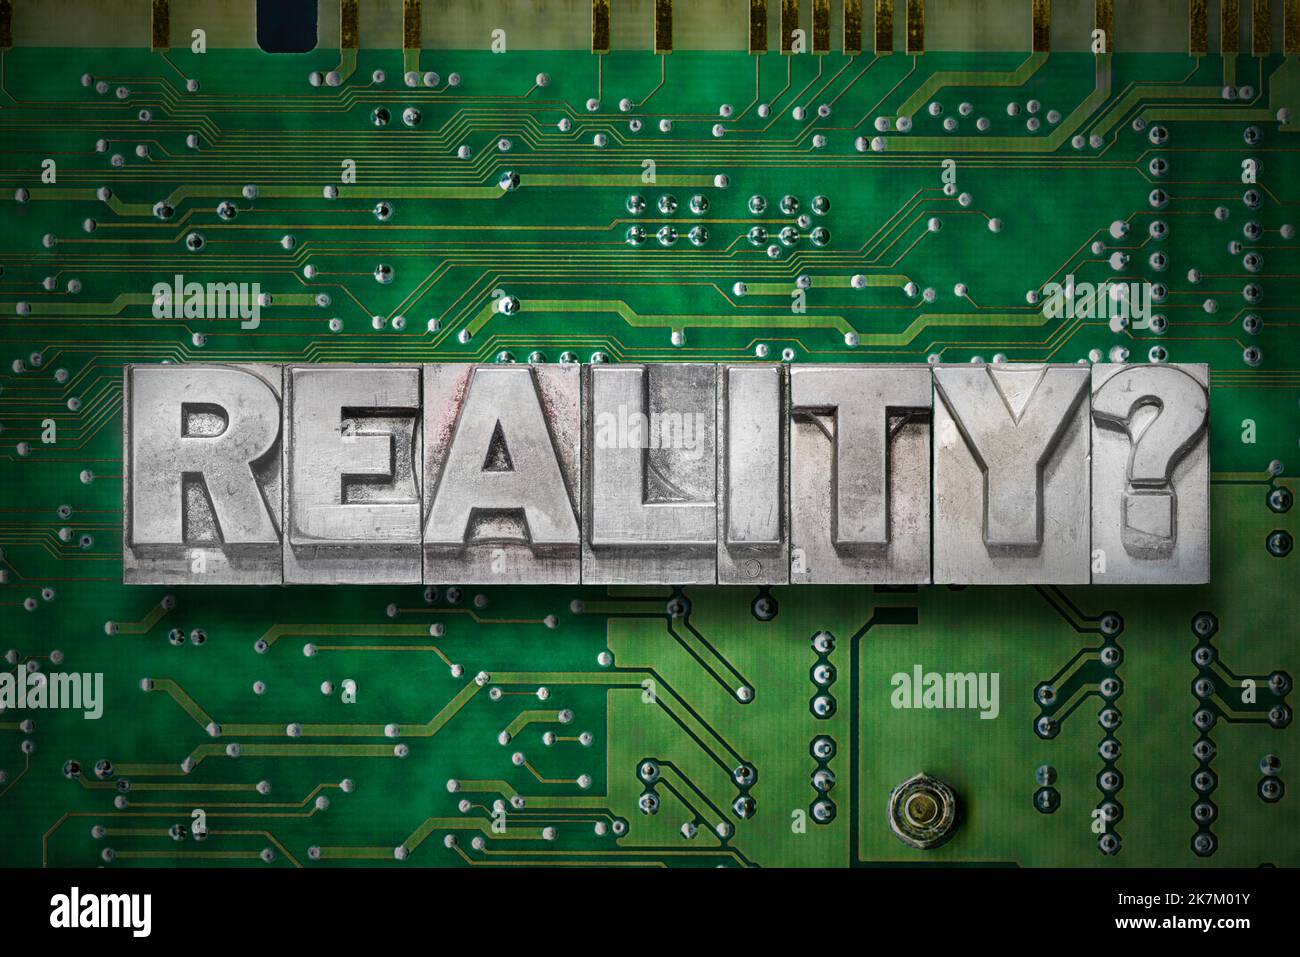 reality question made from metallic letterpress blocks on the pc board background Stock Photo